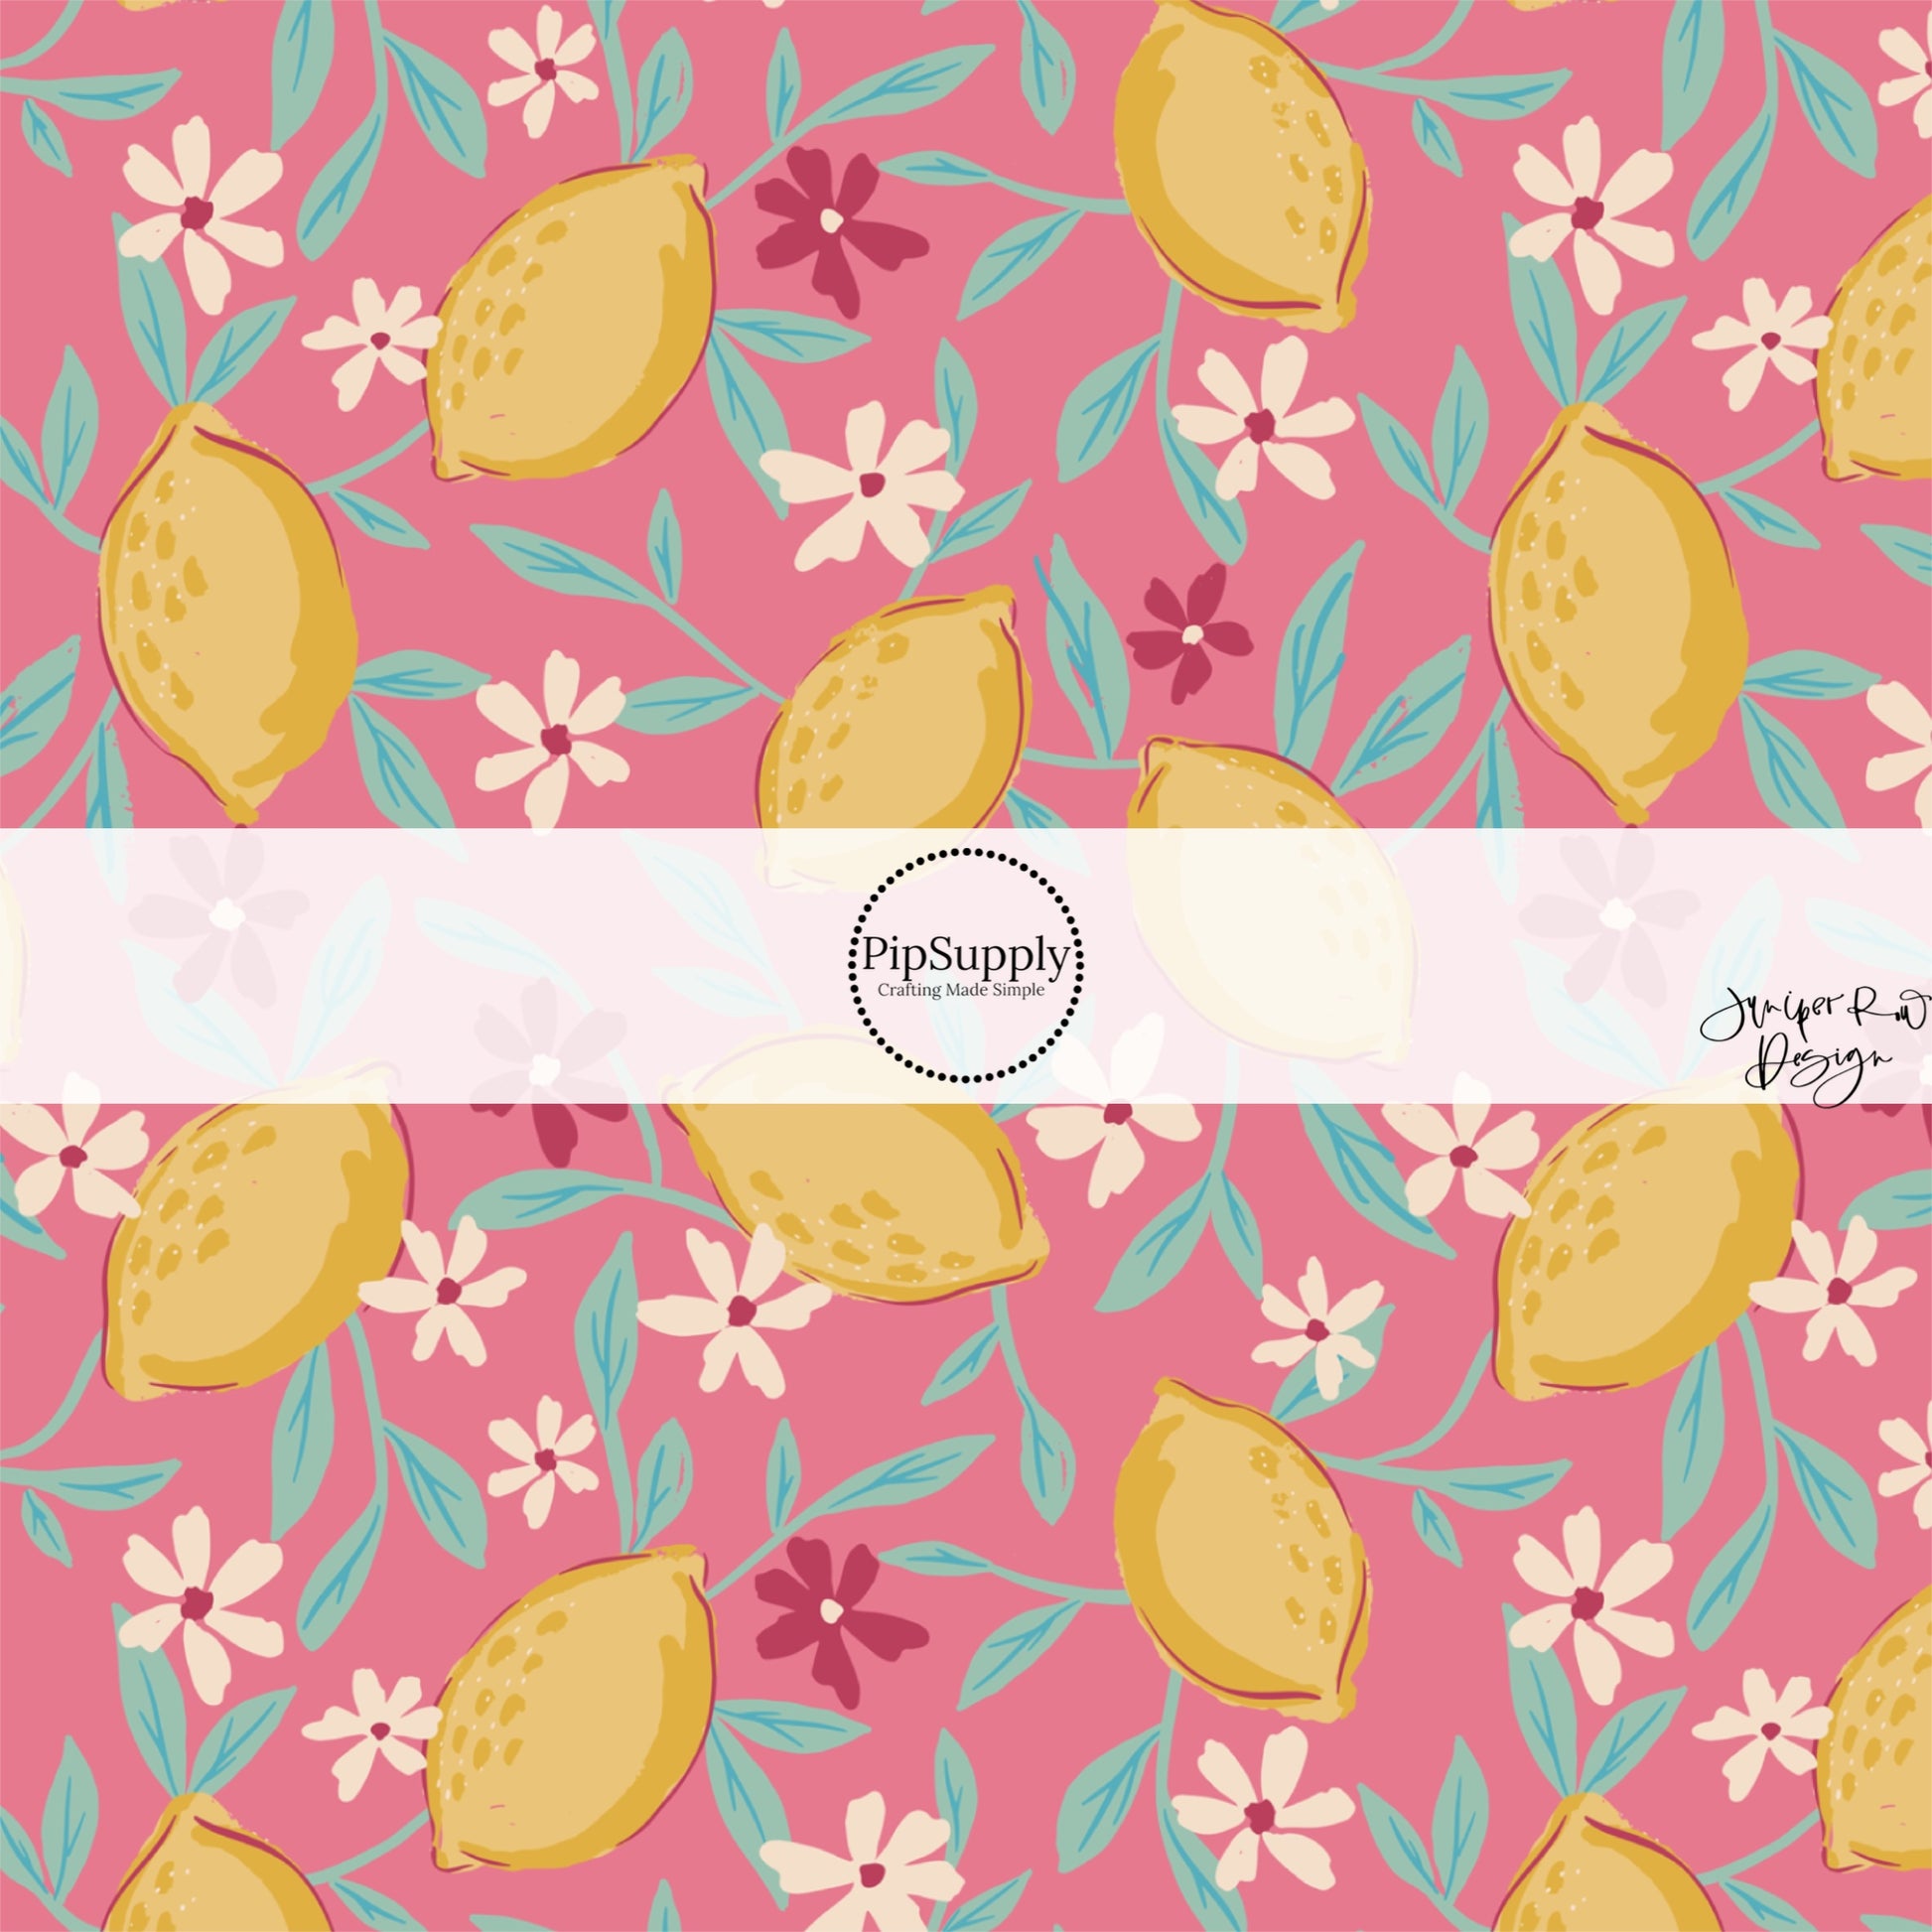 This summer fabric by the yard features lemons surrounded by tiny flowers on pink. This fun summer themed fabric can be used for all your sewing and crafting needs!